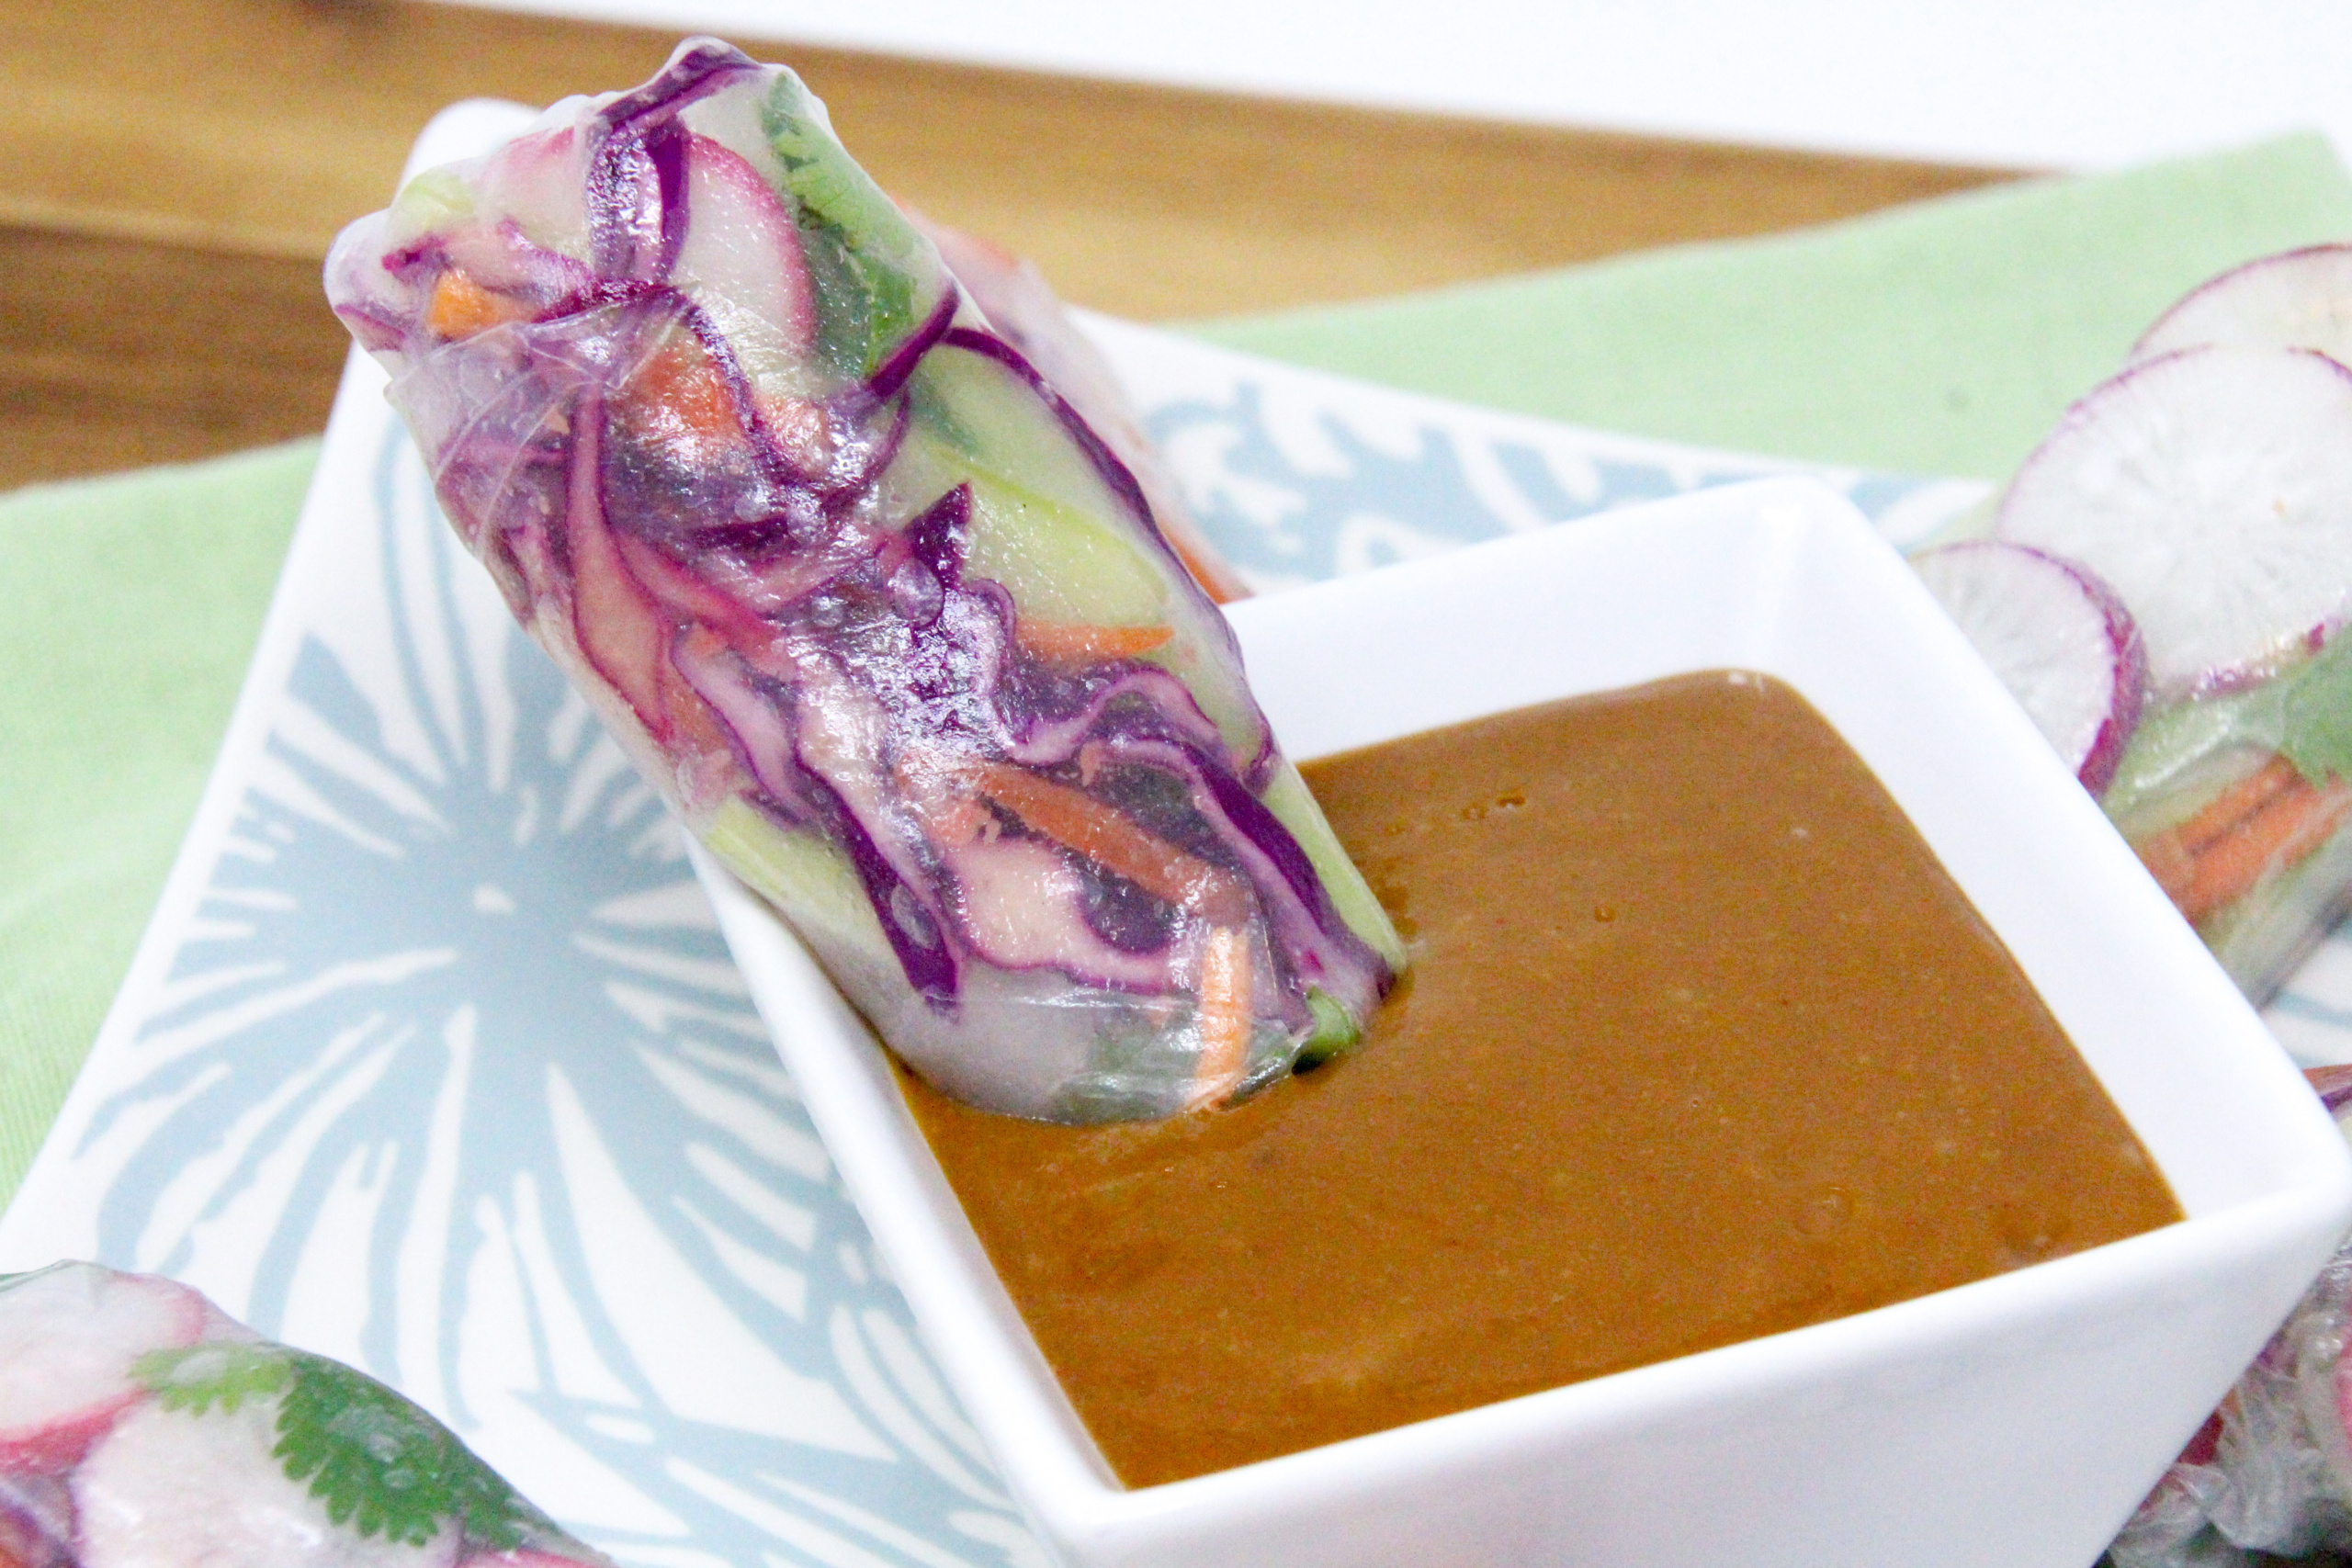 Vegetarian Spring Rolls with a Thai-inspired peanut butter dipping sauce is a delicious no-cook appetizer or side dish! Recipe shared with permission granted by Maddie Day, author of MURDER AT A CAPE BOOK STORE. 